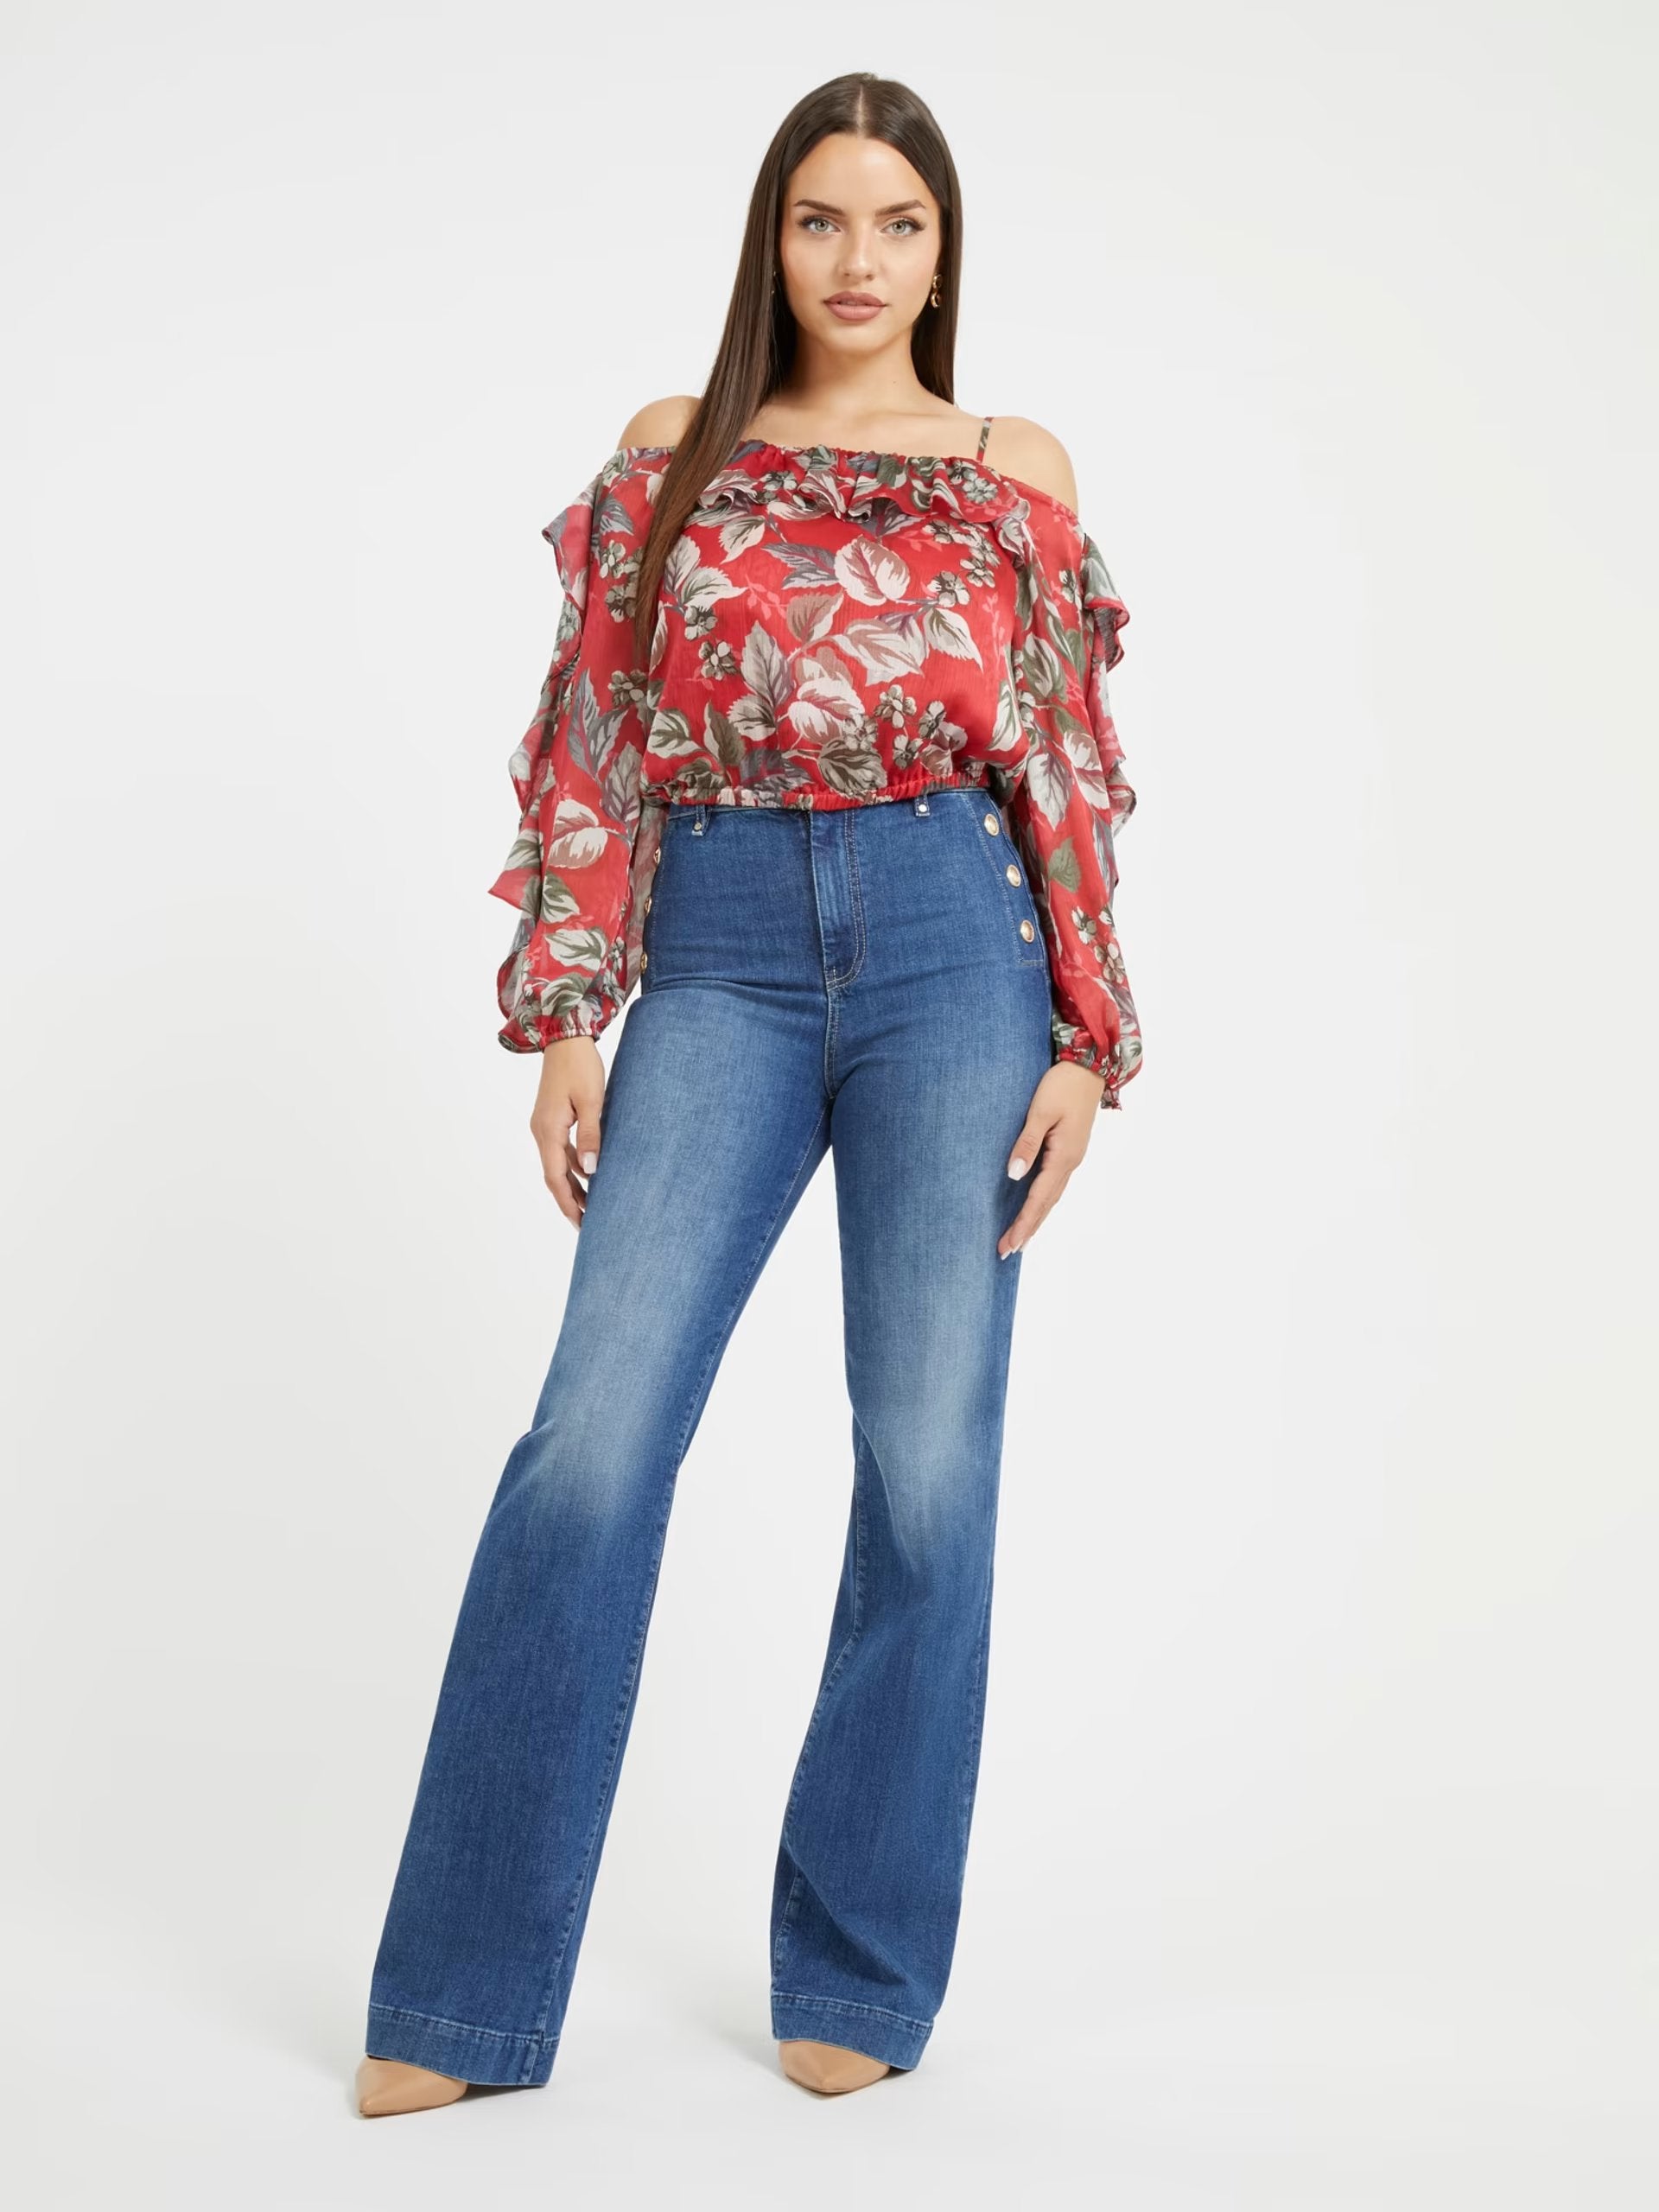 IGGY FLORAL RUFFLE TOP – GUESS